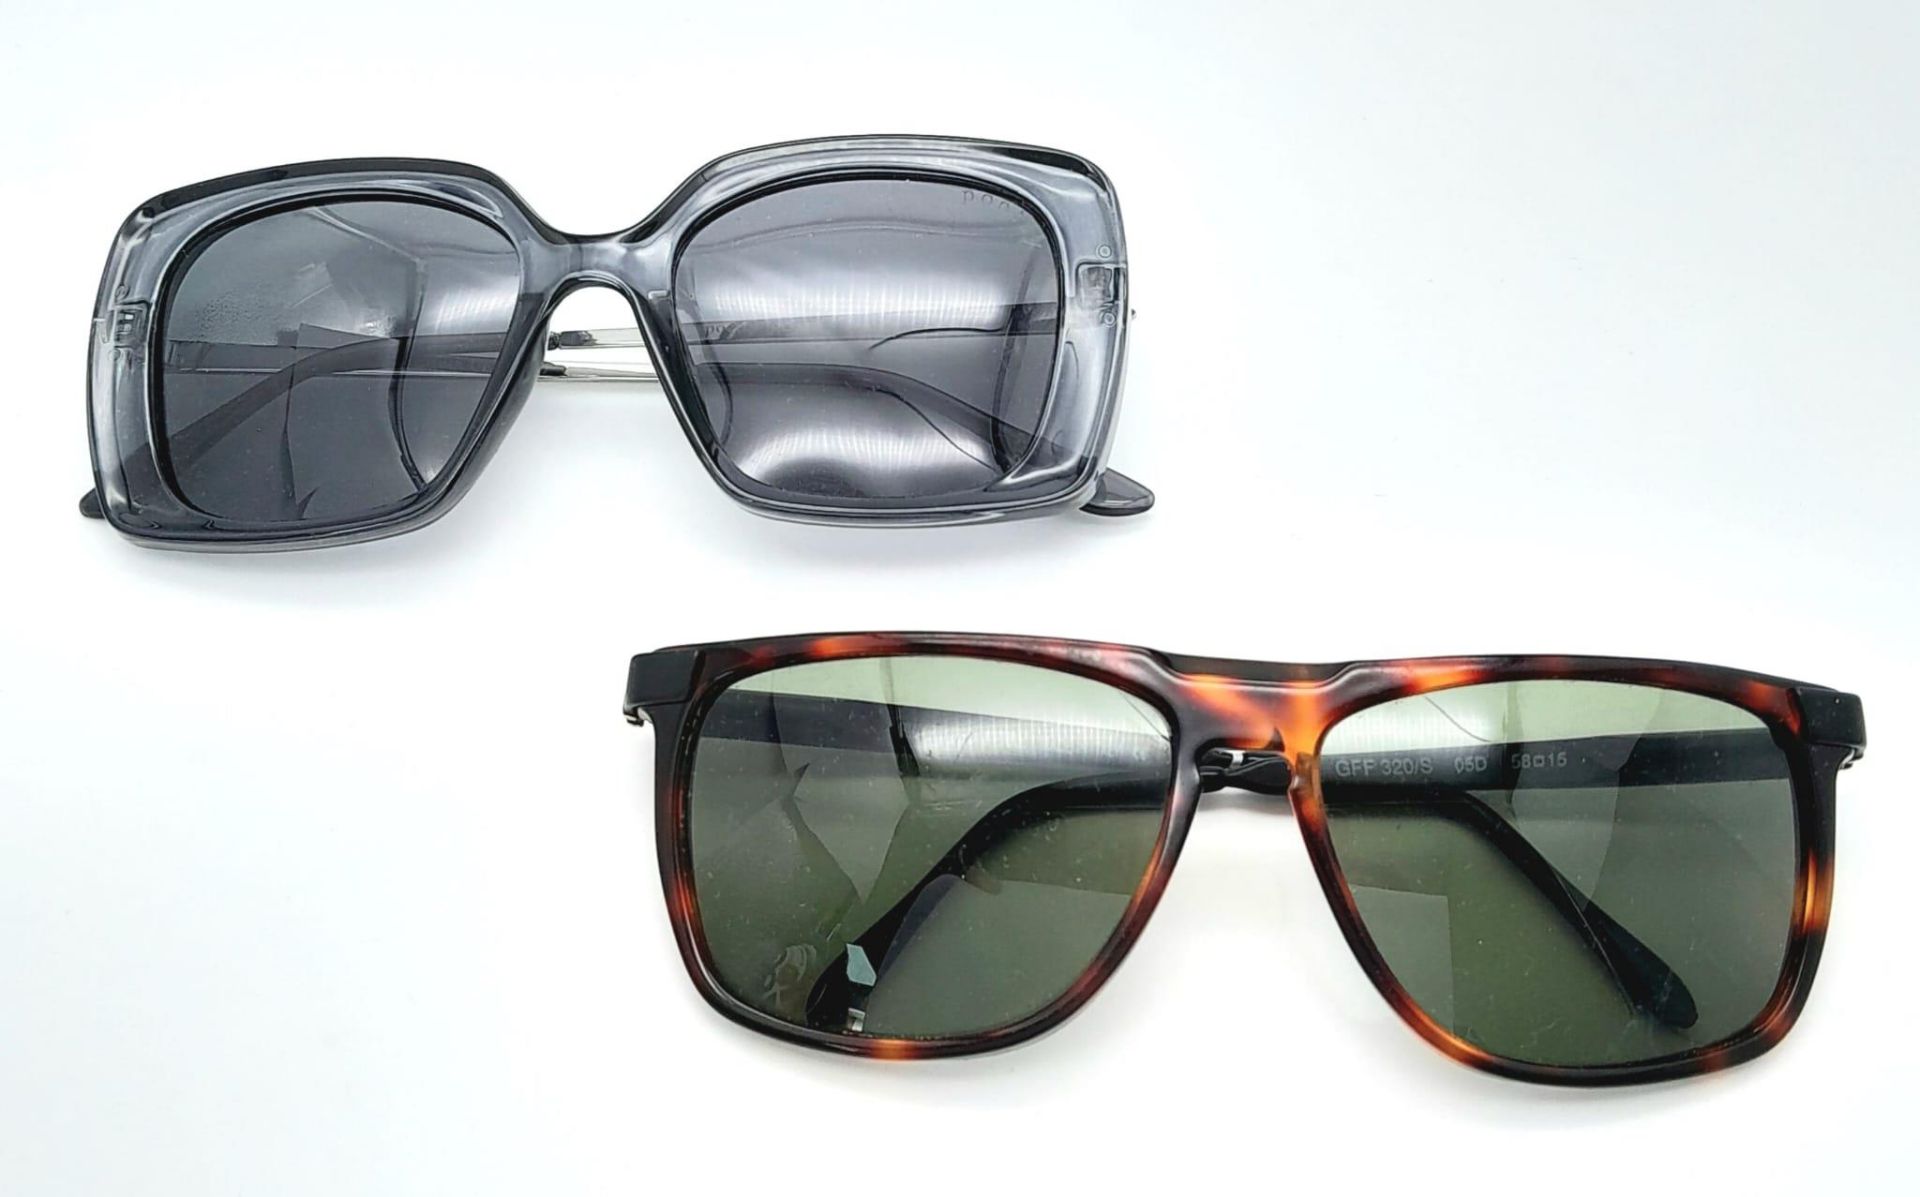 Two Pairs of Designer Sunglasses - Poetry and Ferre.